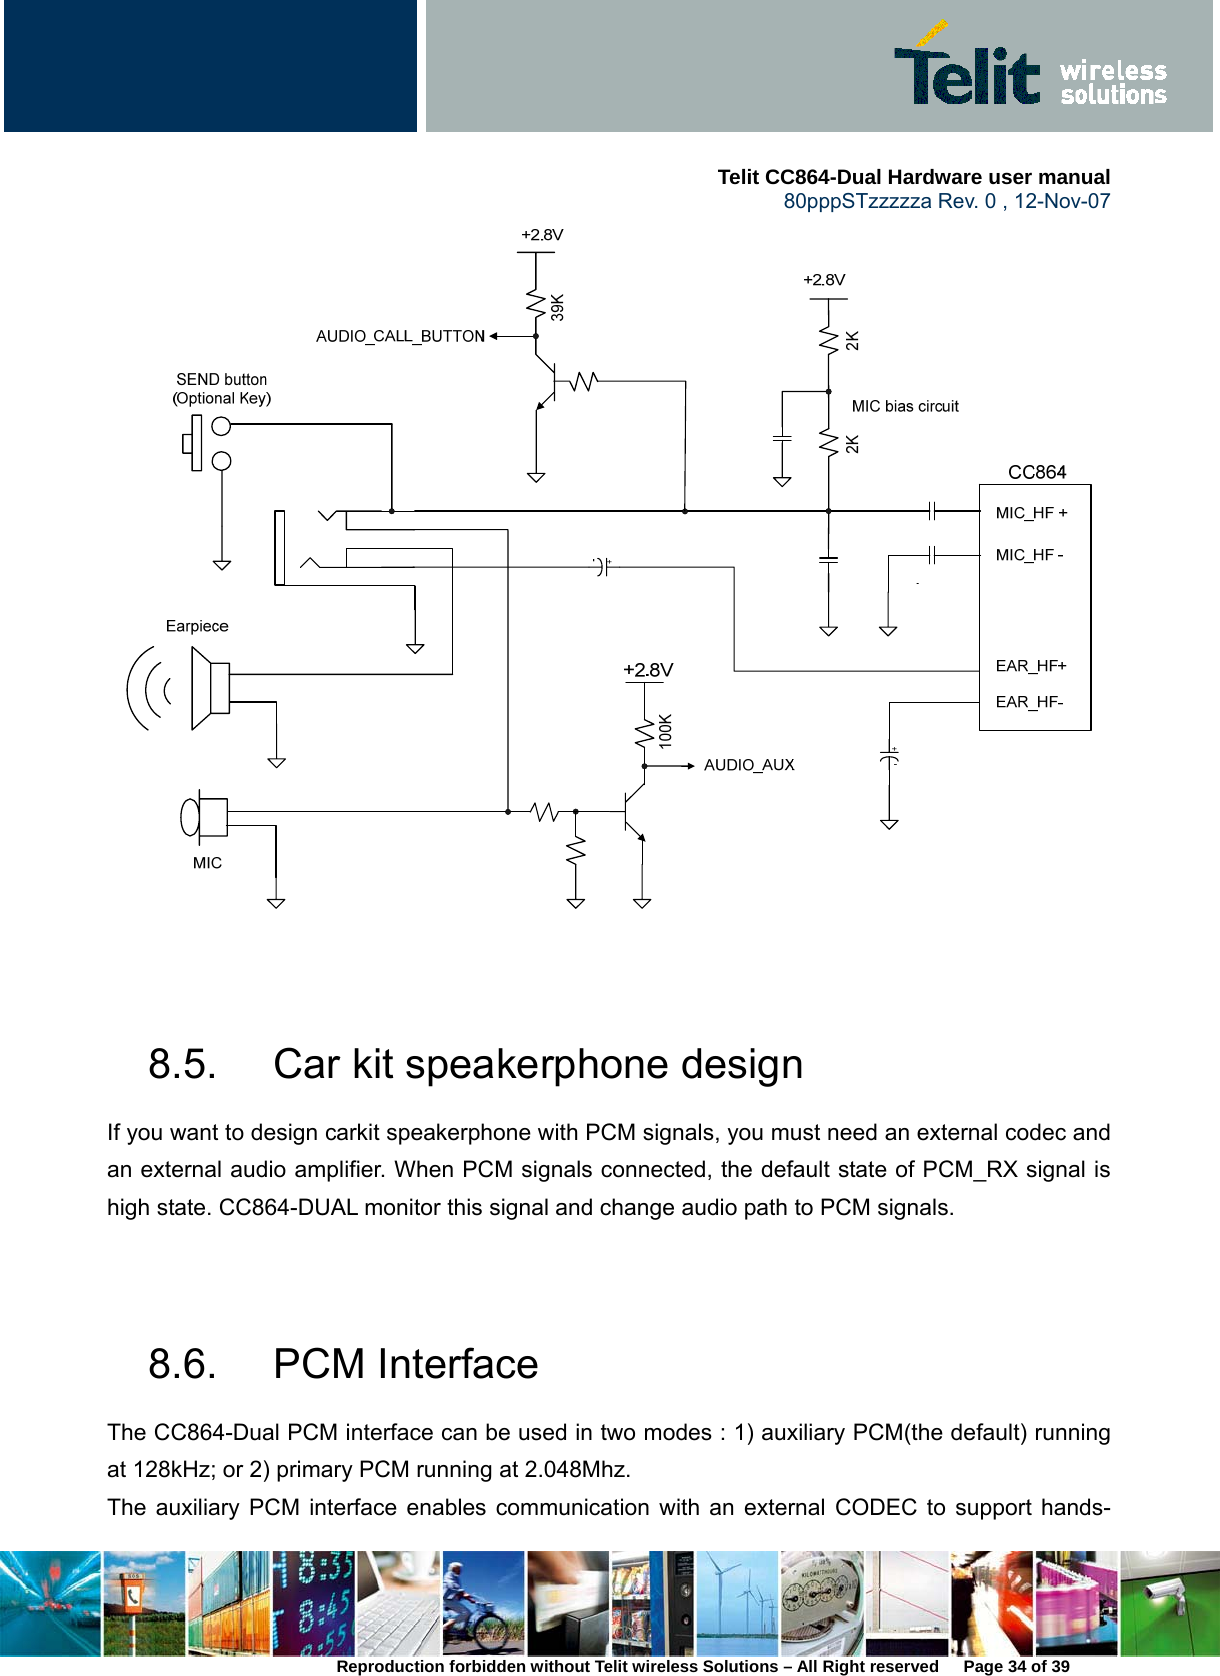     Telit CC864-Dual Hardware user manual   80pppSTzzzzza Rev. 0 , 12-Nov-07 Reproduction forbidden without Telit wireless Solutions – All Right reserved      Page 34 of 39    8.5.  Car kit speakerphone design If you want to design carkit speakerphone with PCM signals, you must need an external codec and an external audio amplifier. When PCM signals connected, the default state of PCM_RX signal is high state. CC864-DUAL monitor this signal and change audio path to PCM signals.     8.6. PCM Interface The CC864-Dual PCM interface can be used in two modes : 1) auxiliary PCM(the default) running at 128kHz; or 2) primary PCM running at 2.048Mhz.   The auxiliary PCM interface enables communication with an external CODEC to support hands-